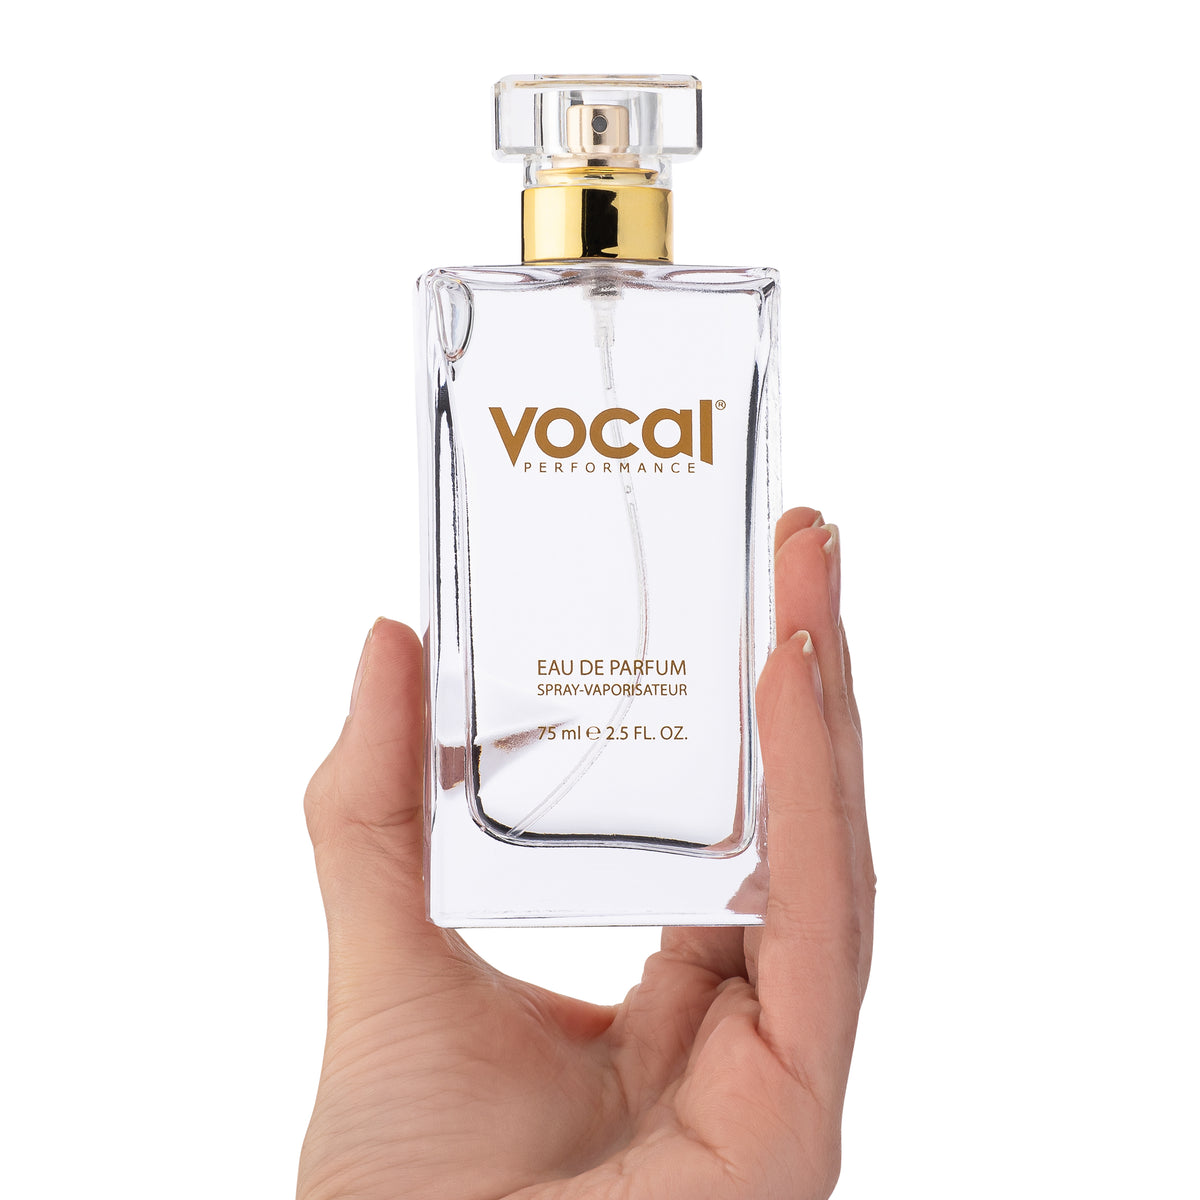 Products – Vocal Fragrances